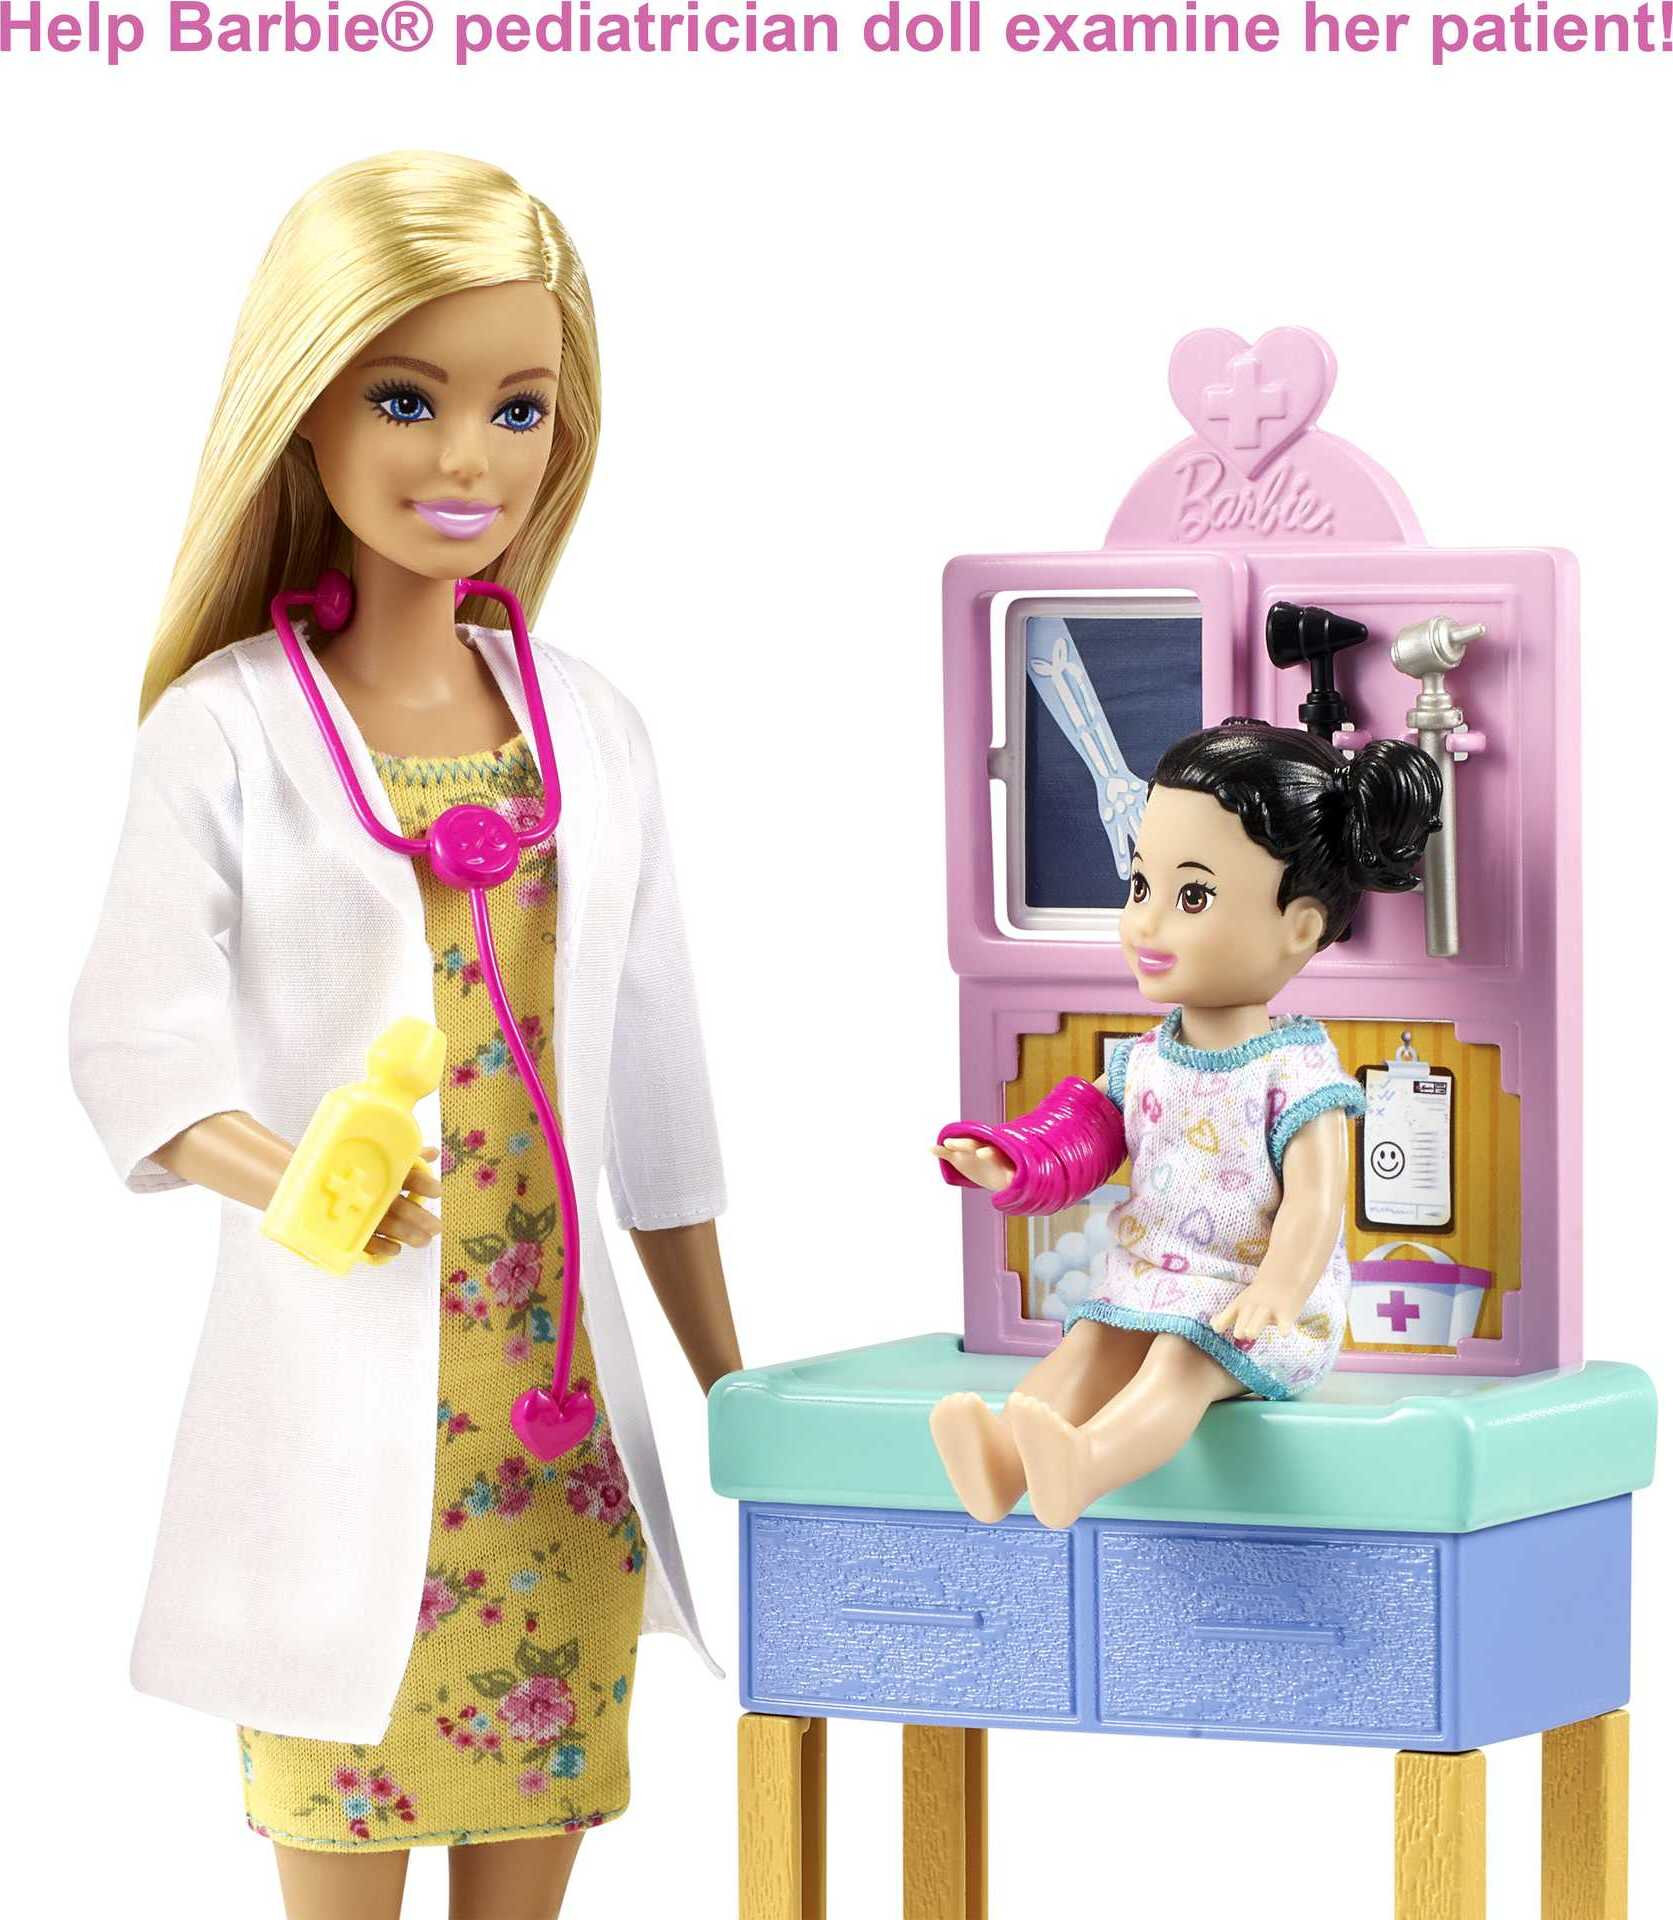 Barbie Careers Pediatrician Playset with Blonde Fashion Doll, 1 Small Doll, Furniture & Accessories - image 4 of 7